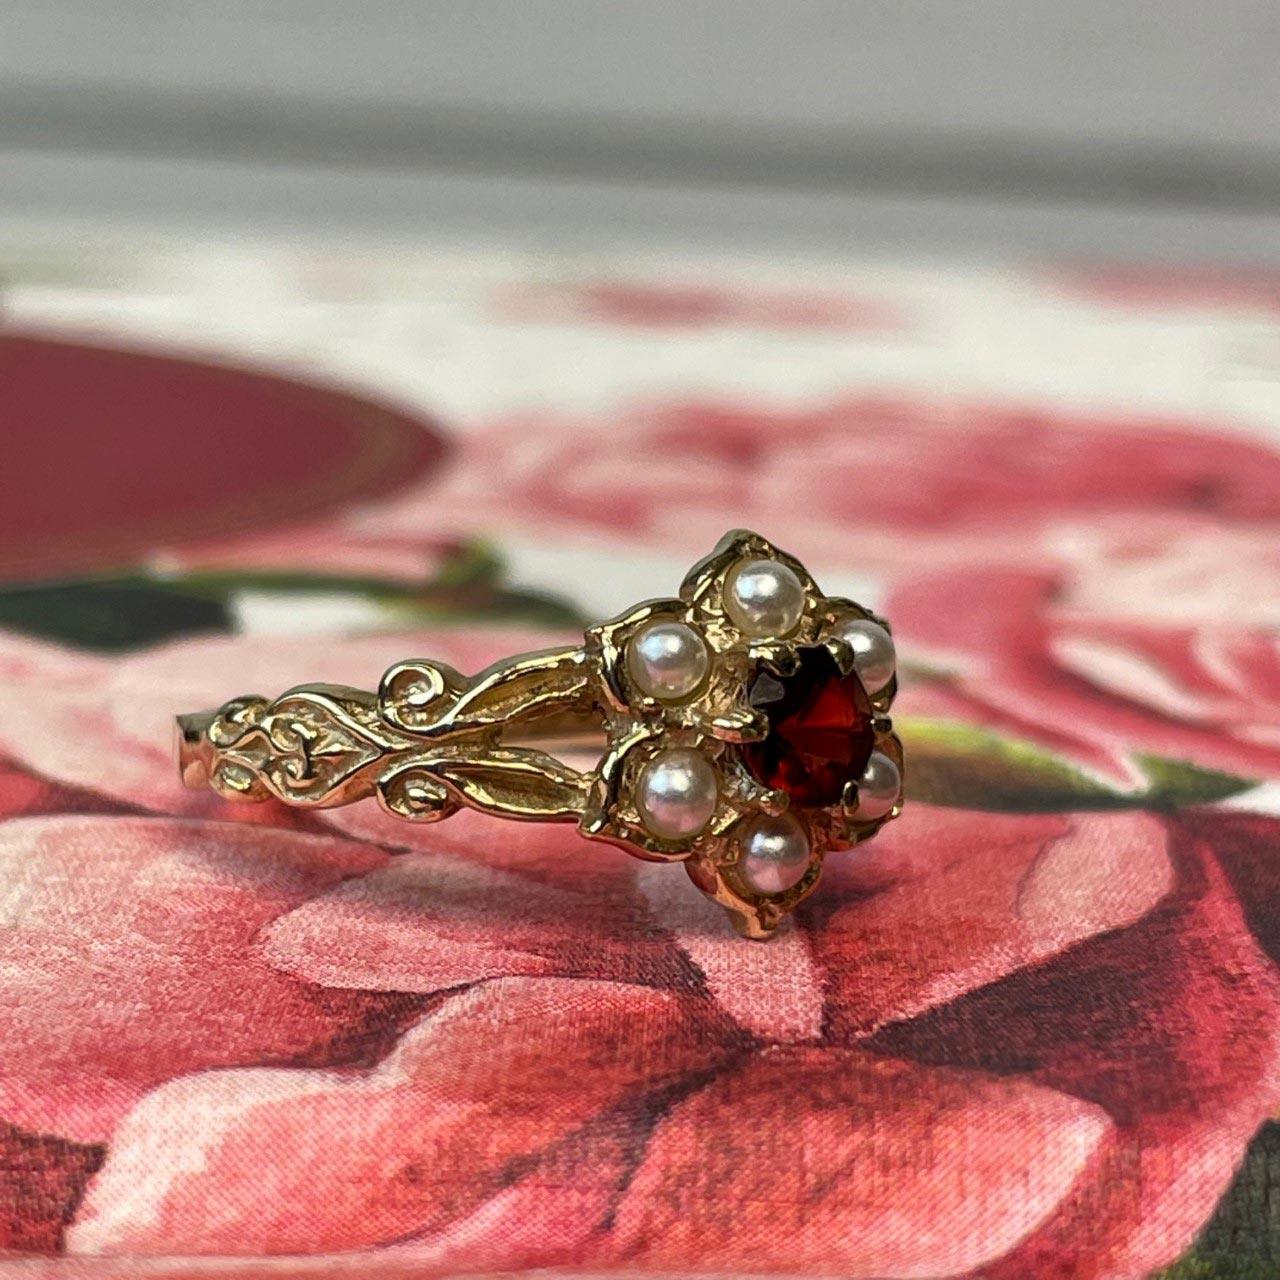 Jane Austen Regency Flower Ring - Gold Plated with Garnet and Pearl